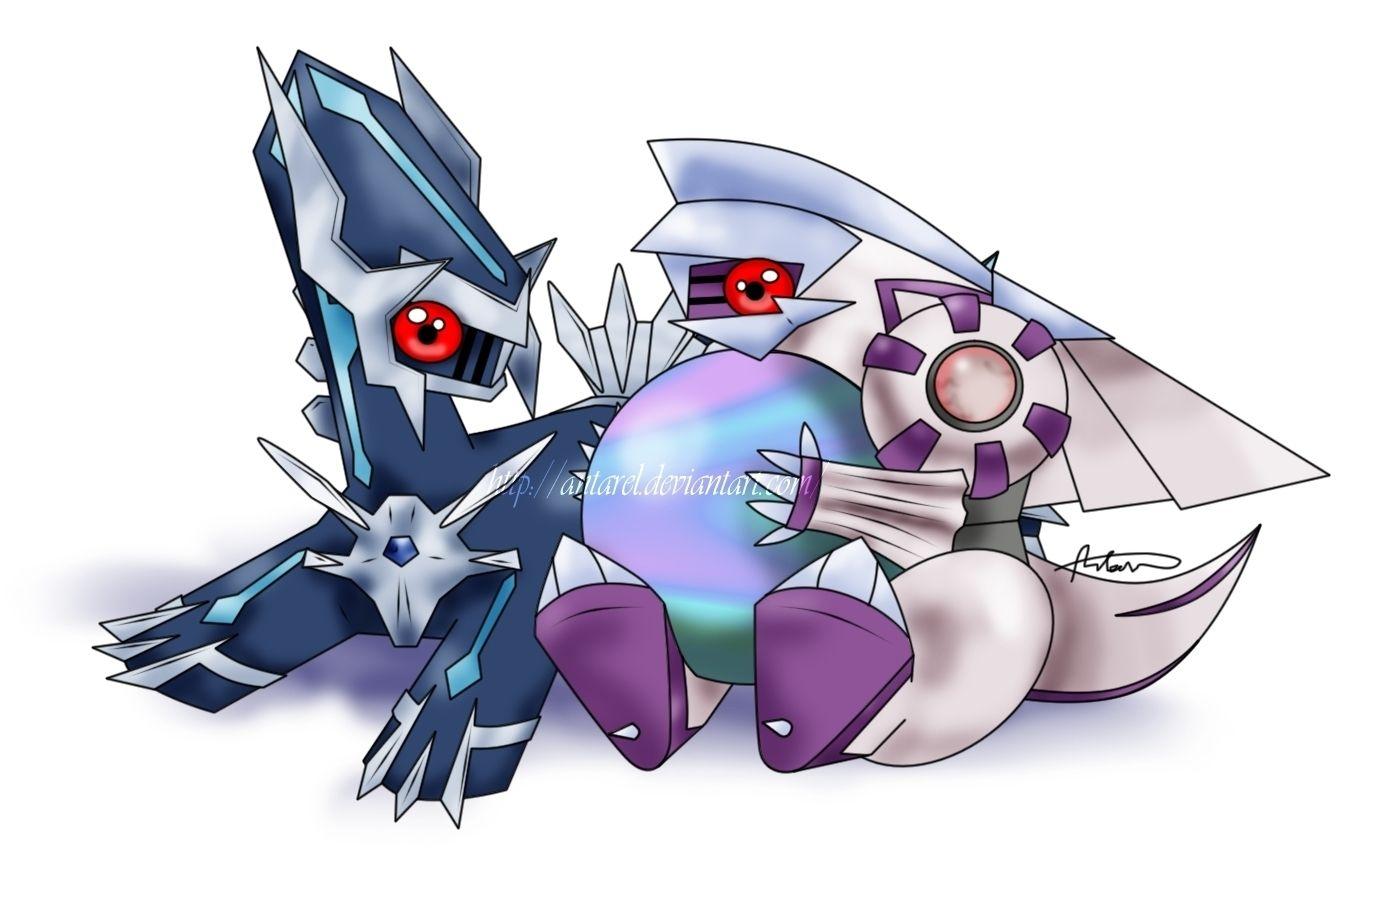 Pokemon: Heart Gold and Soul Silver image baby palkia and baby